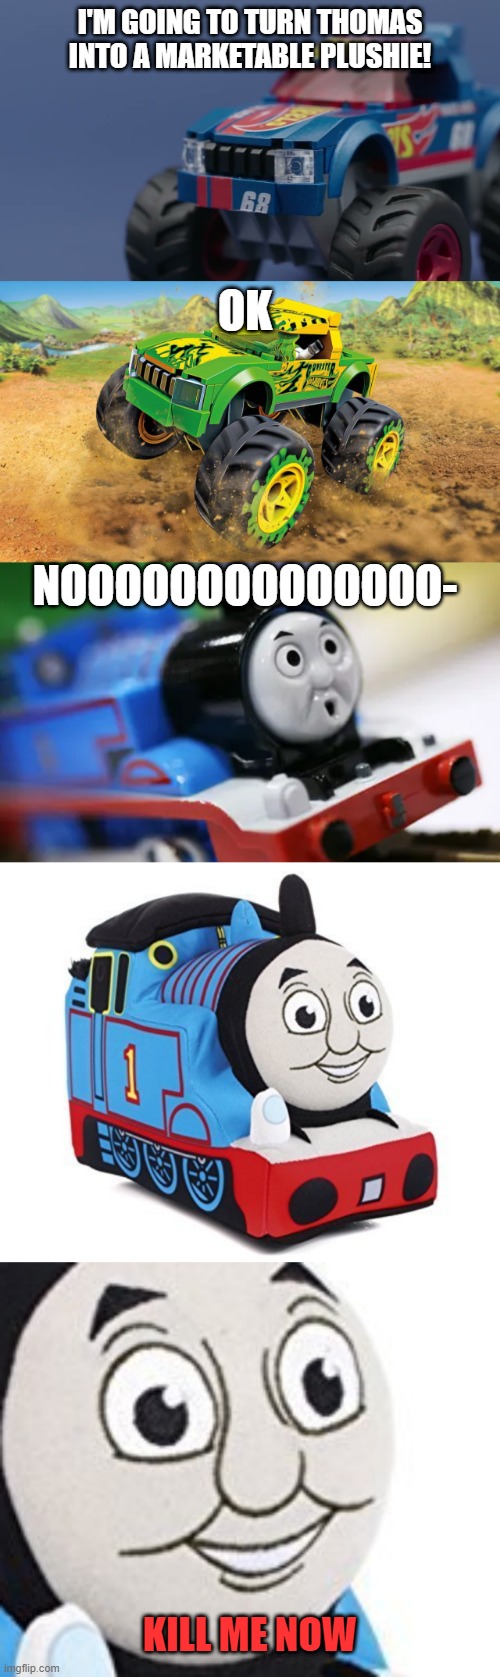 thomas turns into a plushie | I'M GOING TO TURN THOMAS INTO A MARKETABLE PLUSHIE! OK; NOOOOOOOOOOOOOO-; KILL ME NOW | image tagged in funny memes | made w/ Imgflip meme maker